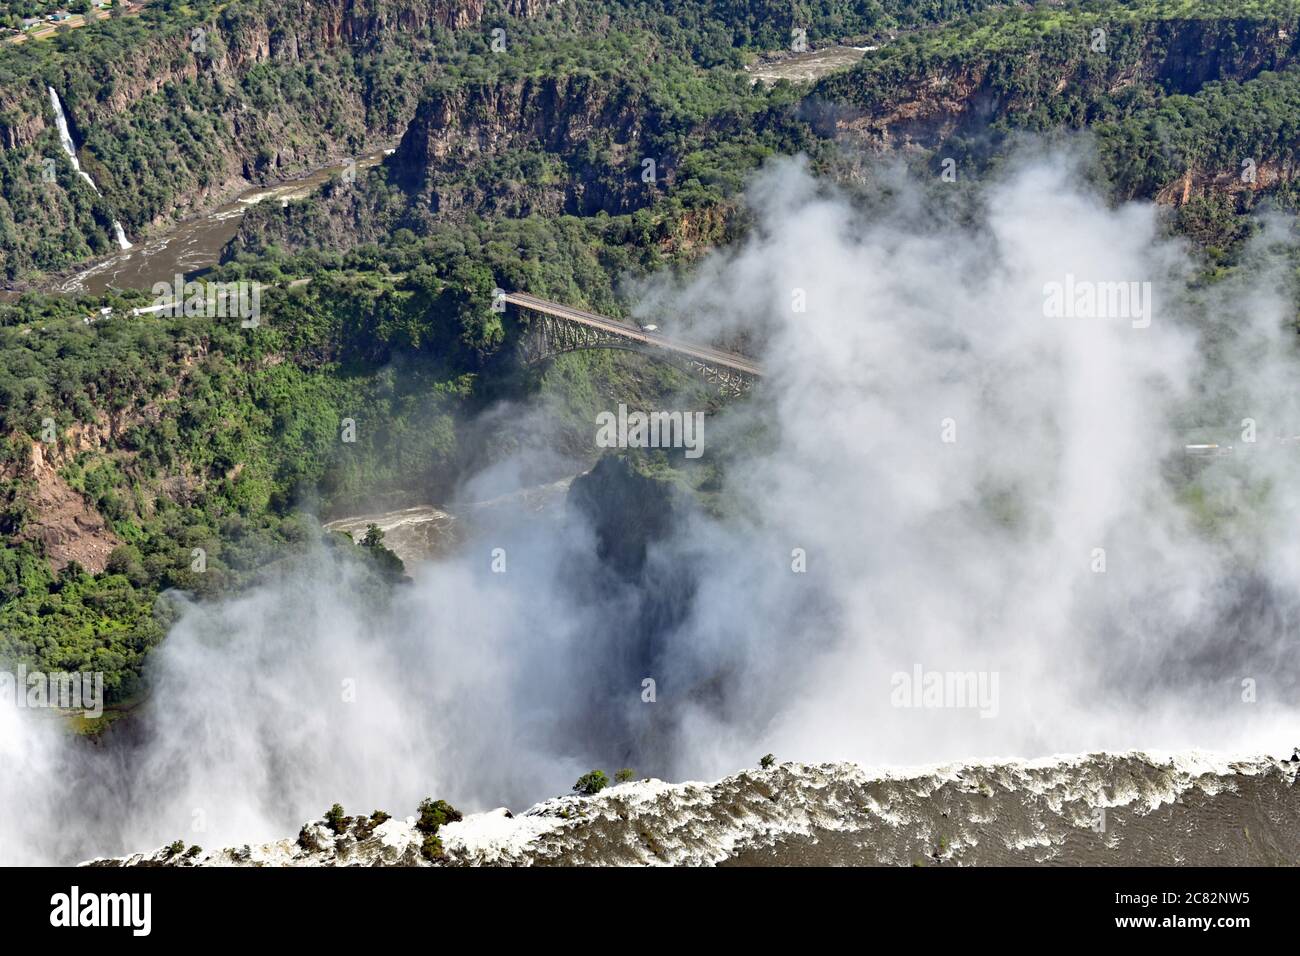 An aerial view of The Smoke That Thunders. Victoria Falls bridge and the gorges can be seen behind the spray from the waterfall.  Zimbabwe and Zambia. Stock Photo